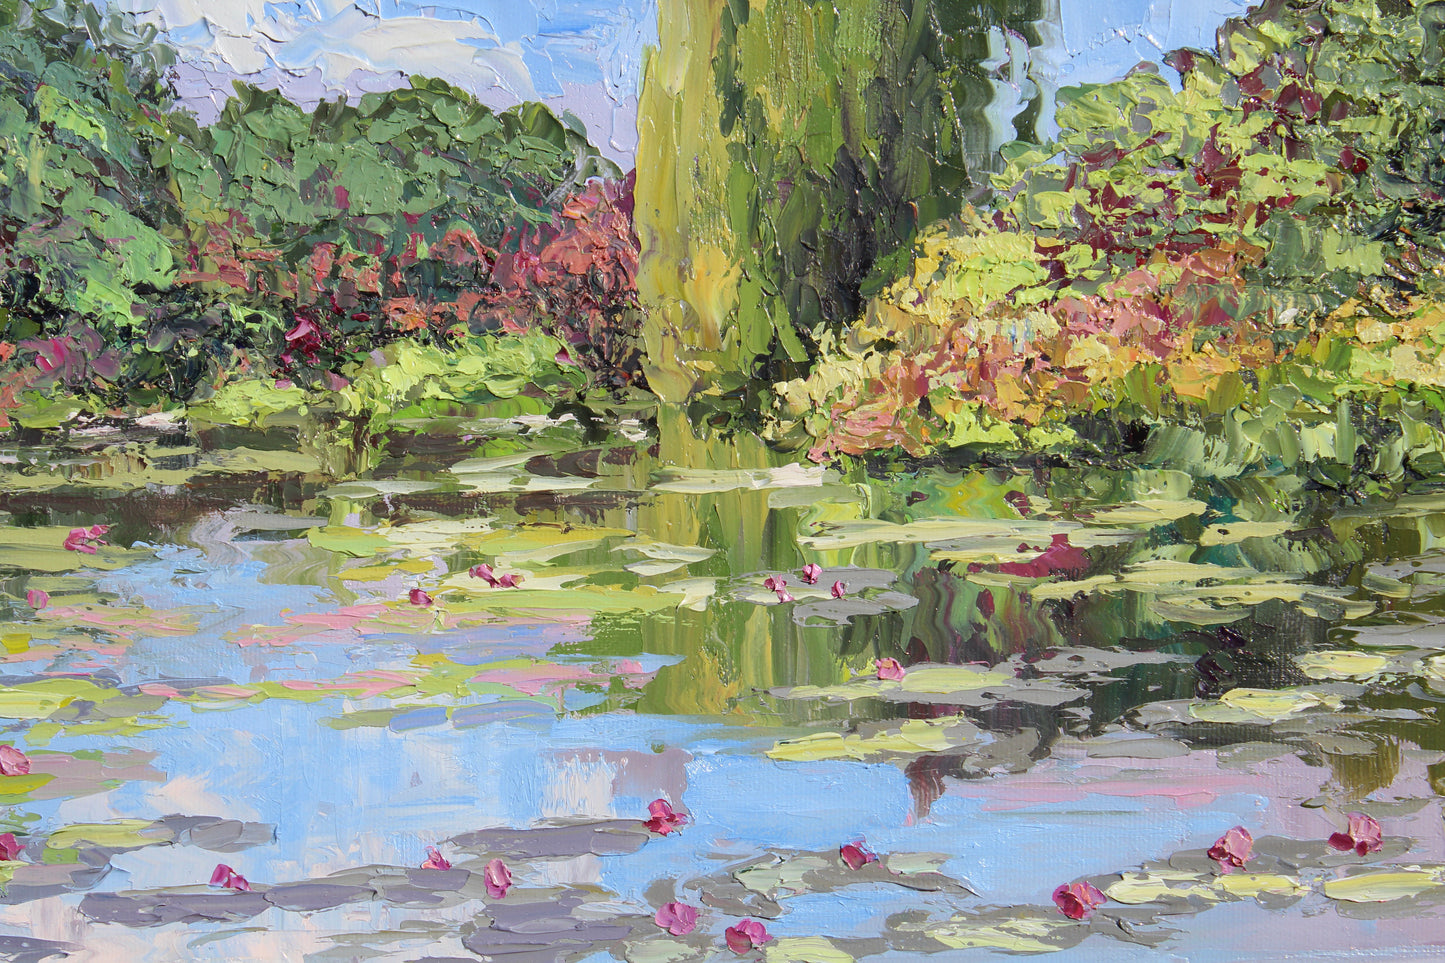 Dreams Of Giverny, 16" x 20" Garden Landscape Of Monet's Waterlily Pond, Oil On Canvas